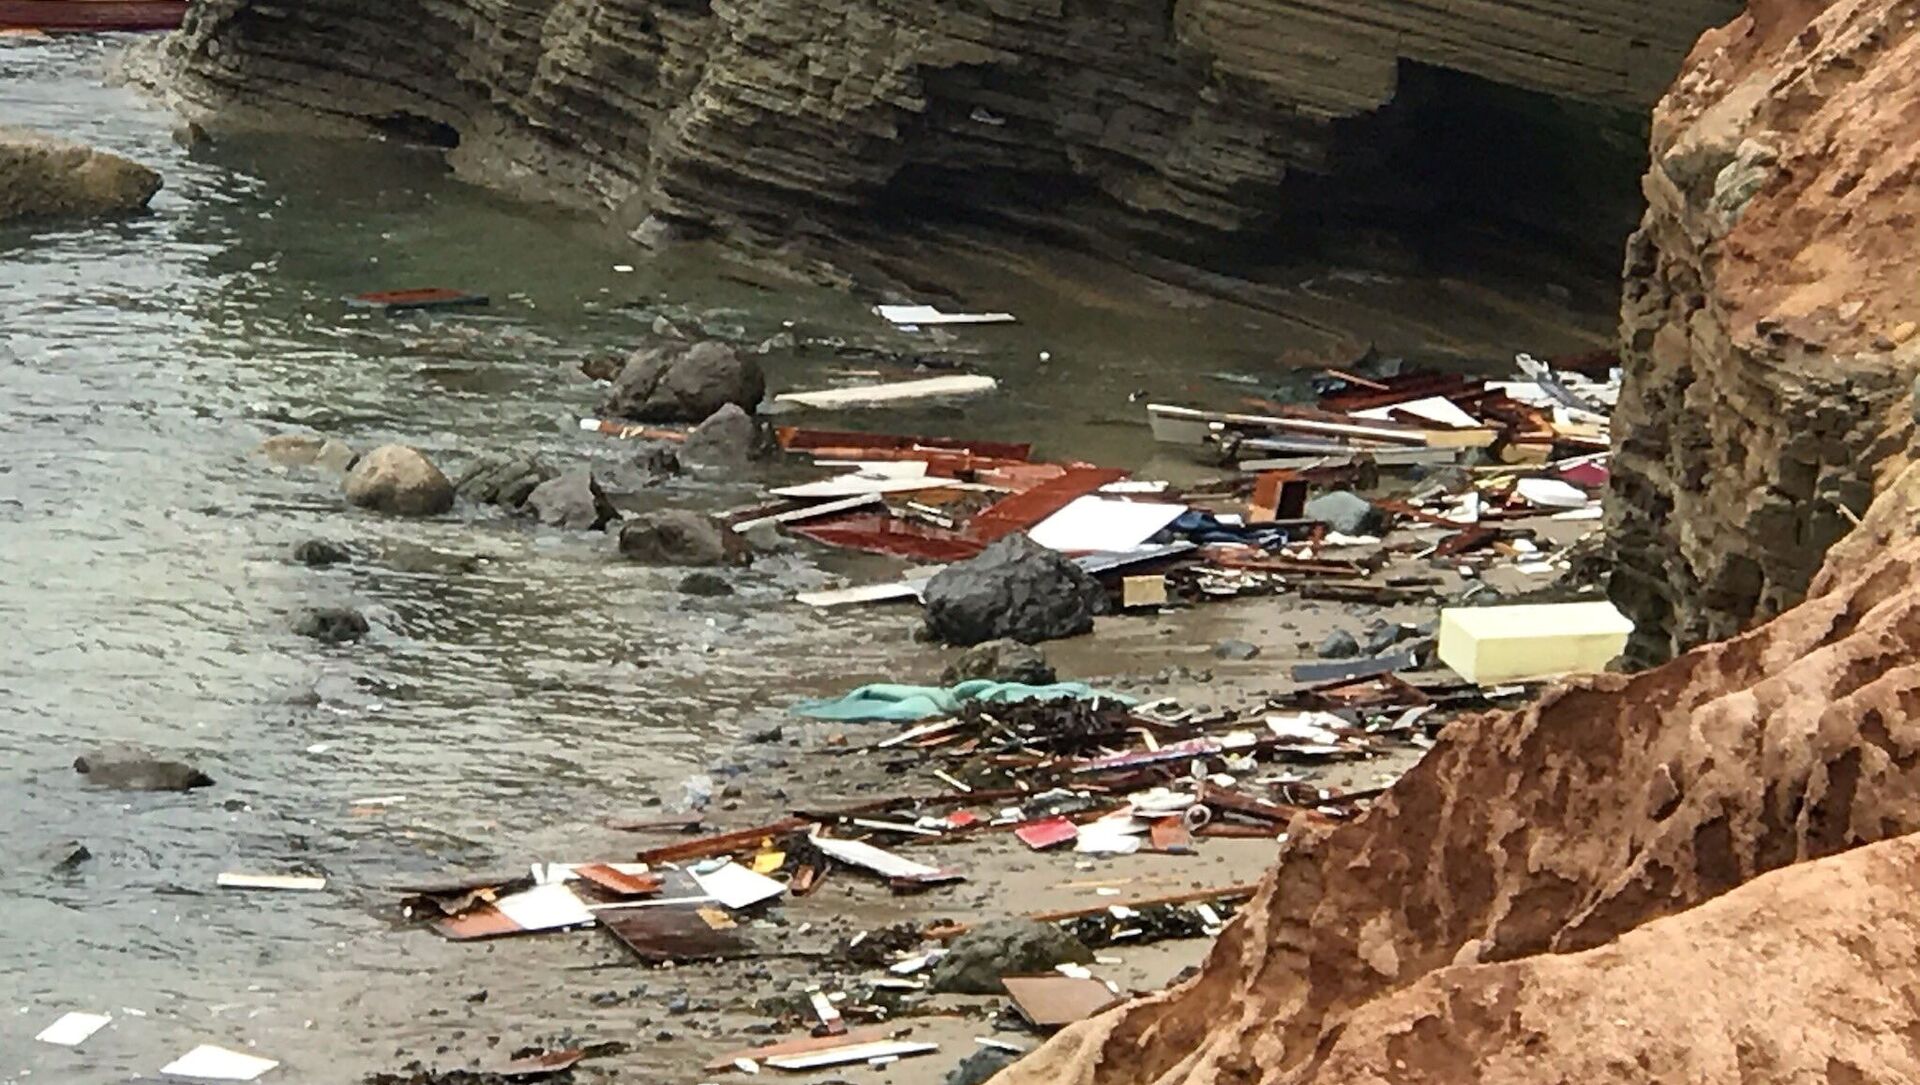 Debris lies in the water after a deadly boat incident, where a 40' cabin cruiser broke up along rocks at Point Loma, San Diego, California, U.S., May 2, 2021 in this image obtained from social media. Picture taken May 2, 2021. San Diego Fire-Rescue Department via REUTERS  - Sputnik International, 1920, 03.05.2021